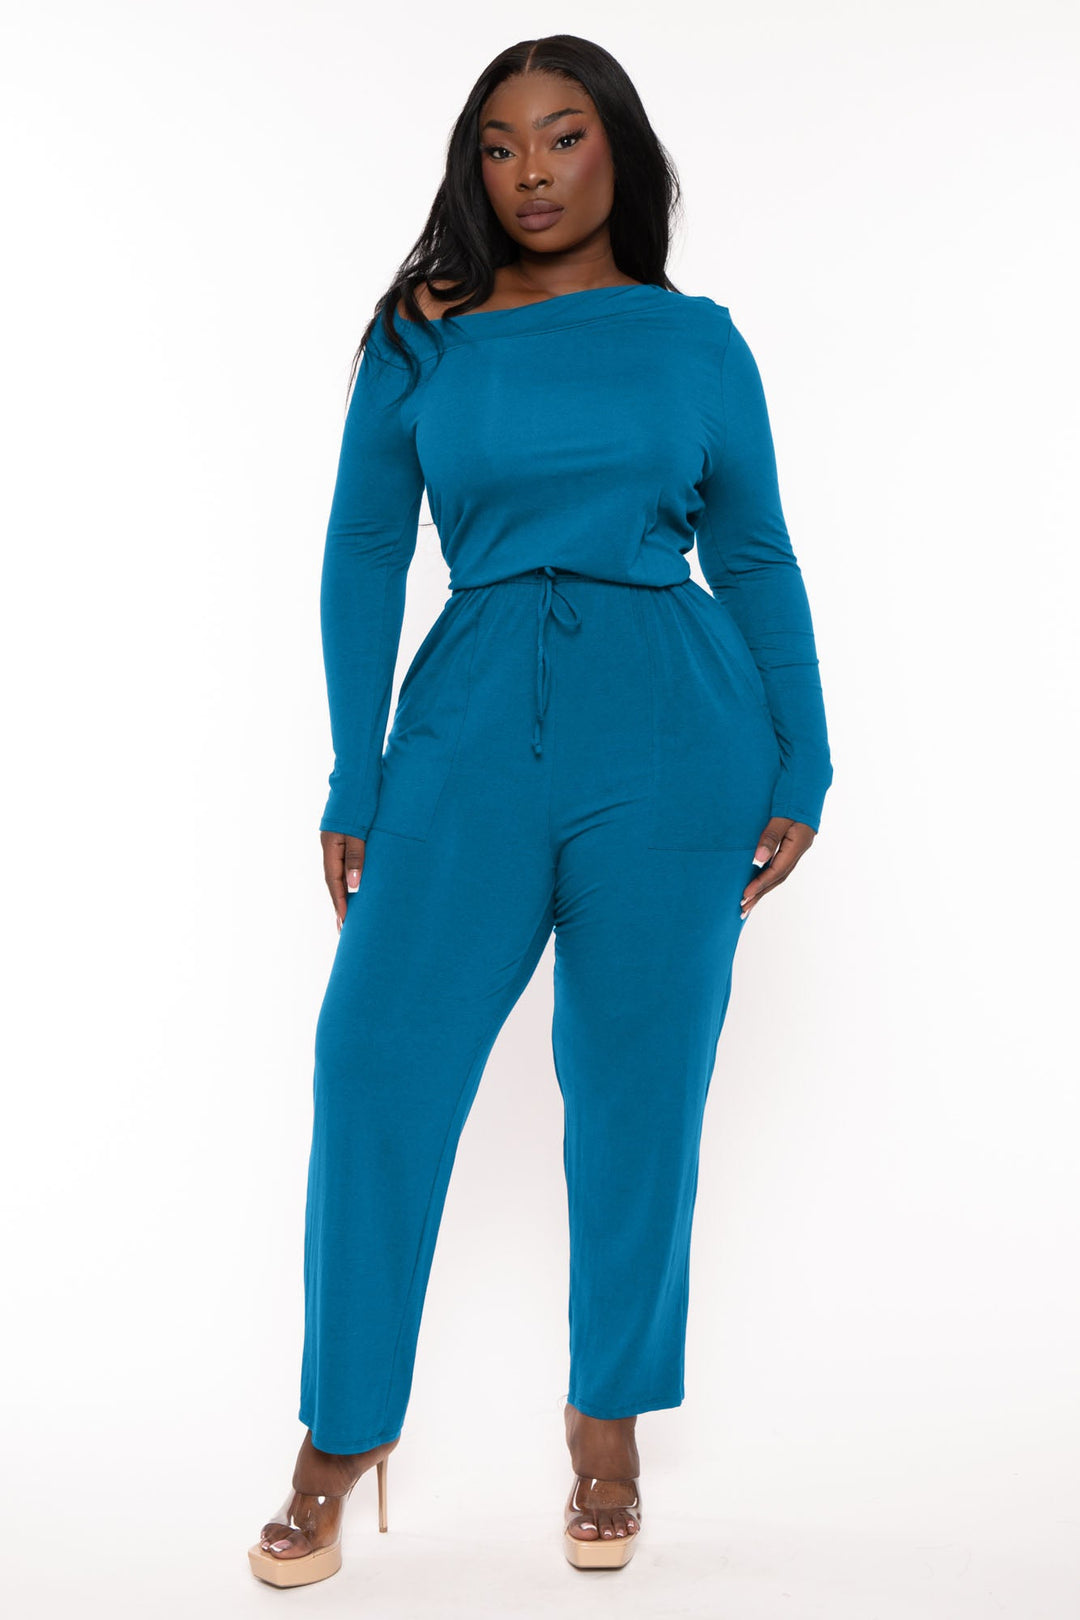 CULTURE CODE Jumpsuits and Rompers 1X / Turquoise Plus Size Lisa Asymmetric Neck Jumpsuit - Turq